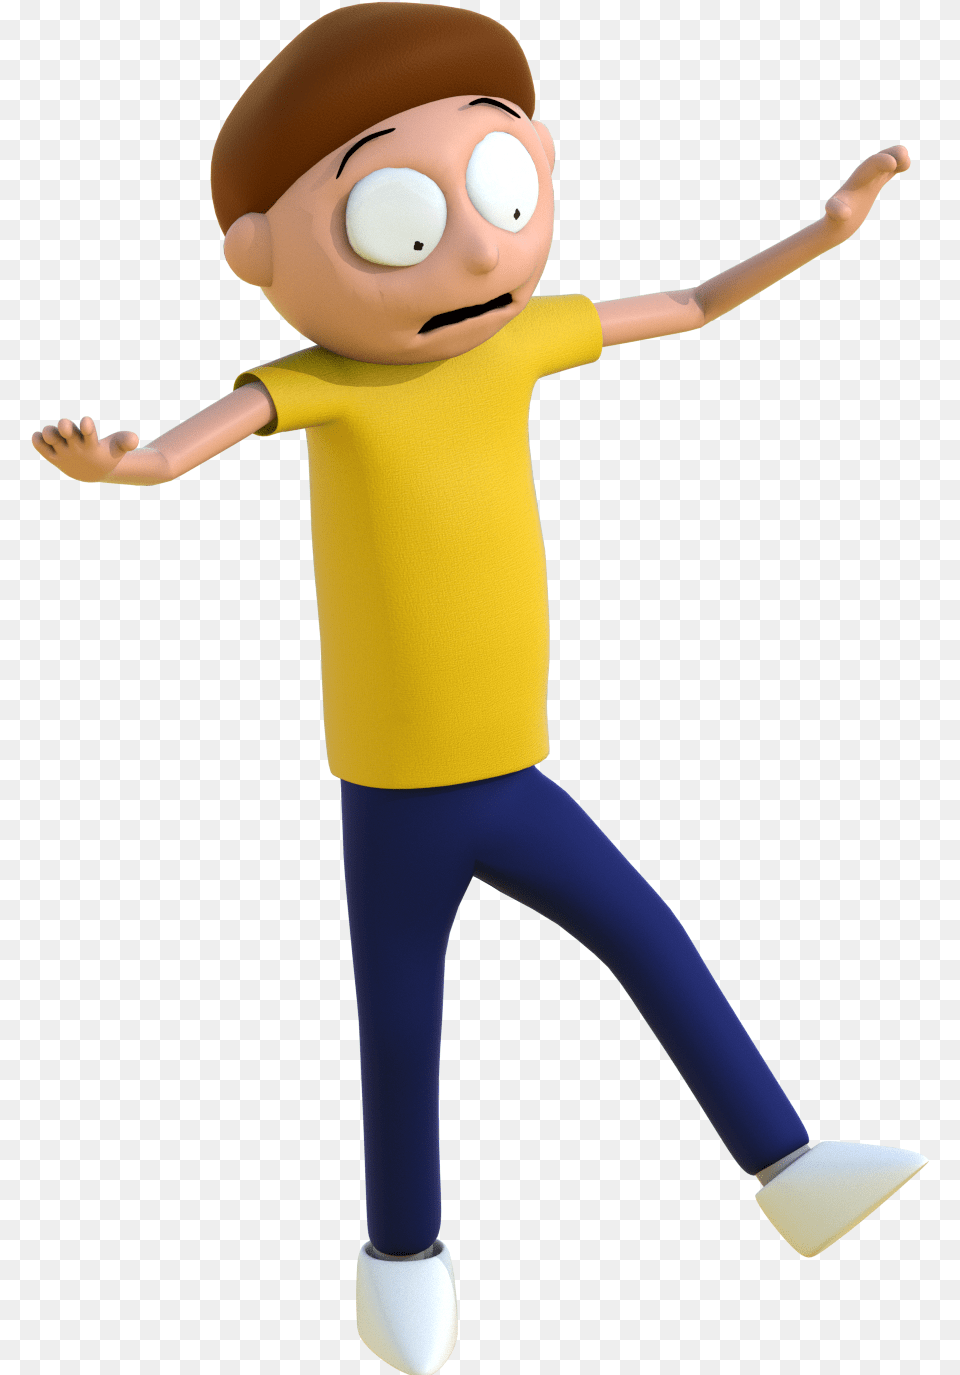 Morty 3d Model I Ve Been Working On For A Few Days Cartoon, Person, Face, Head Free Transparent Png